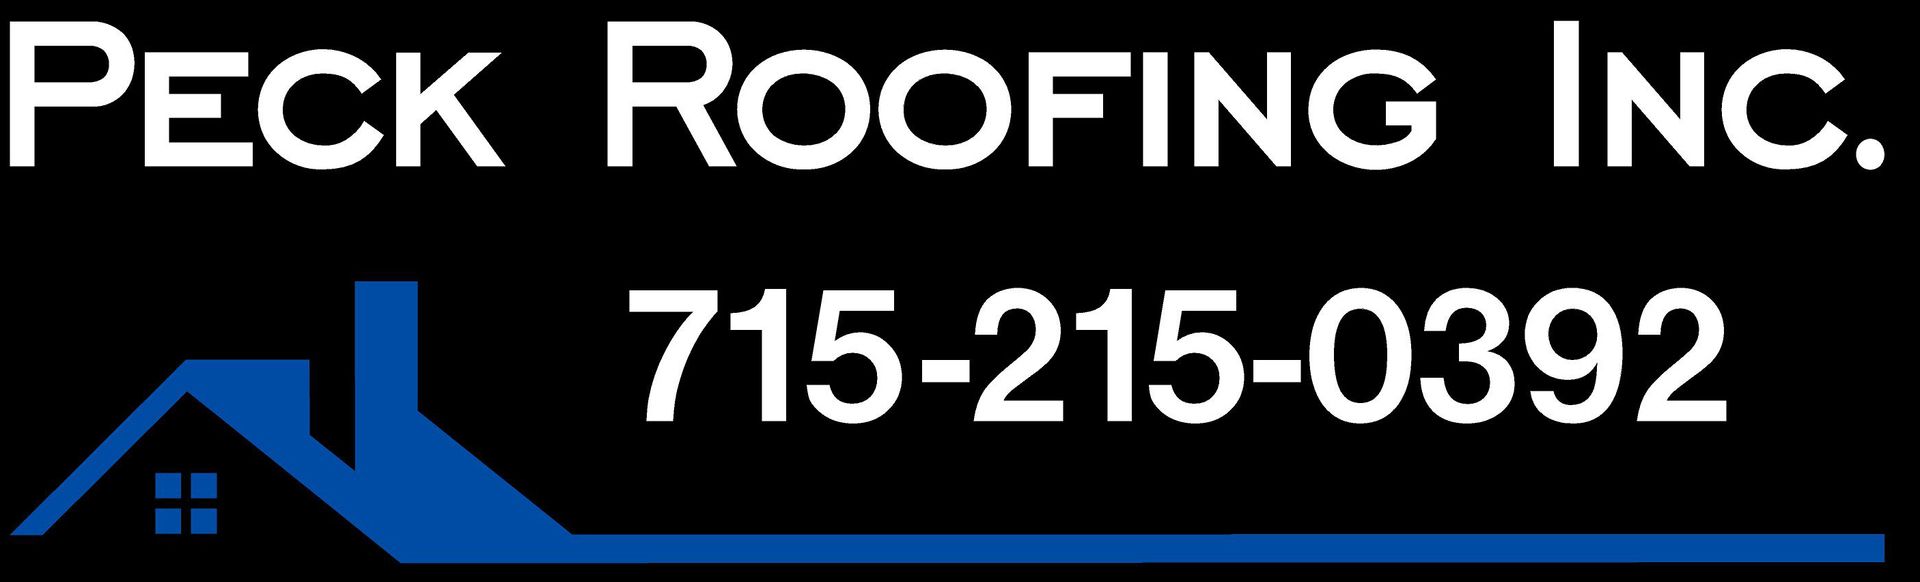 Peck Roofing Inc.